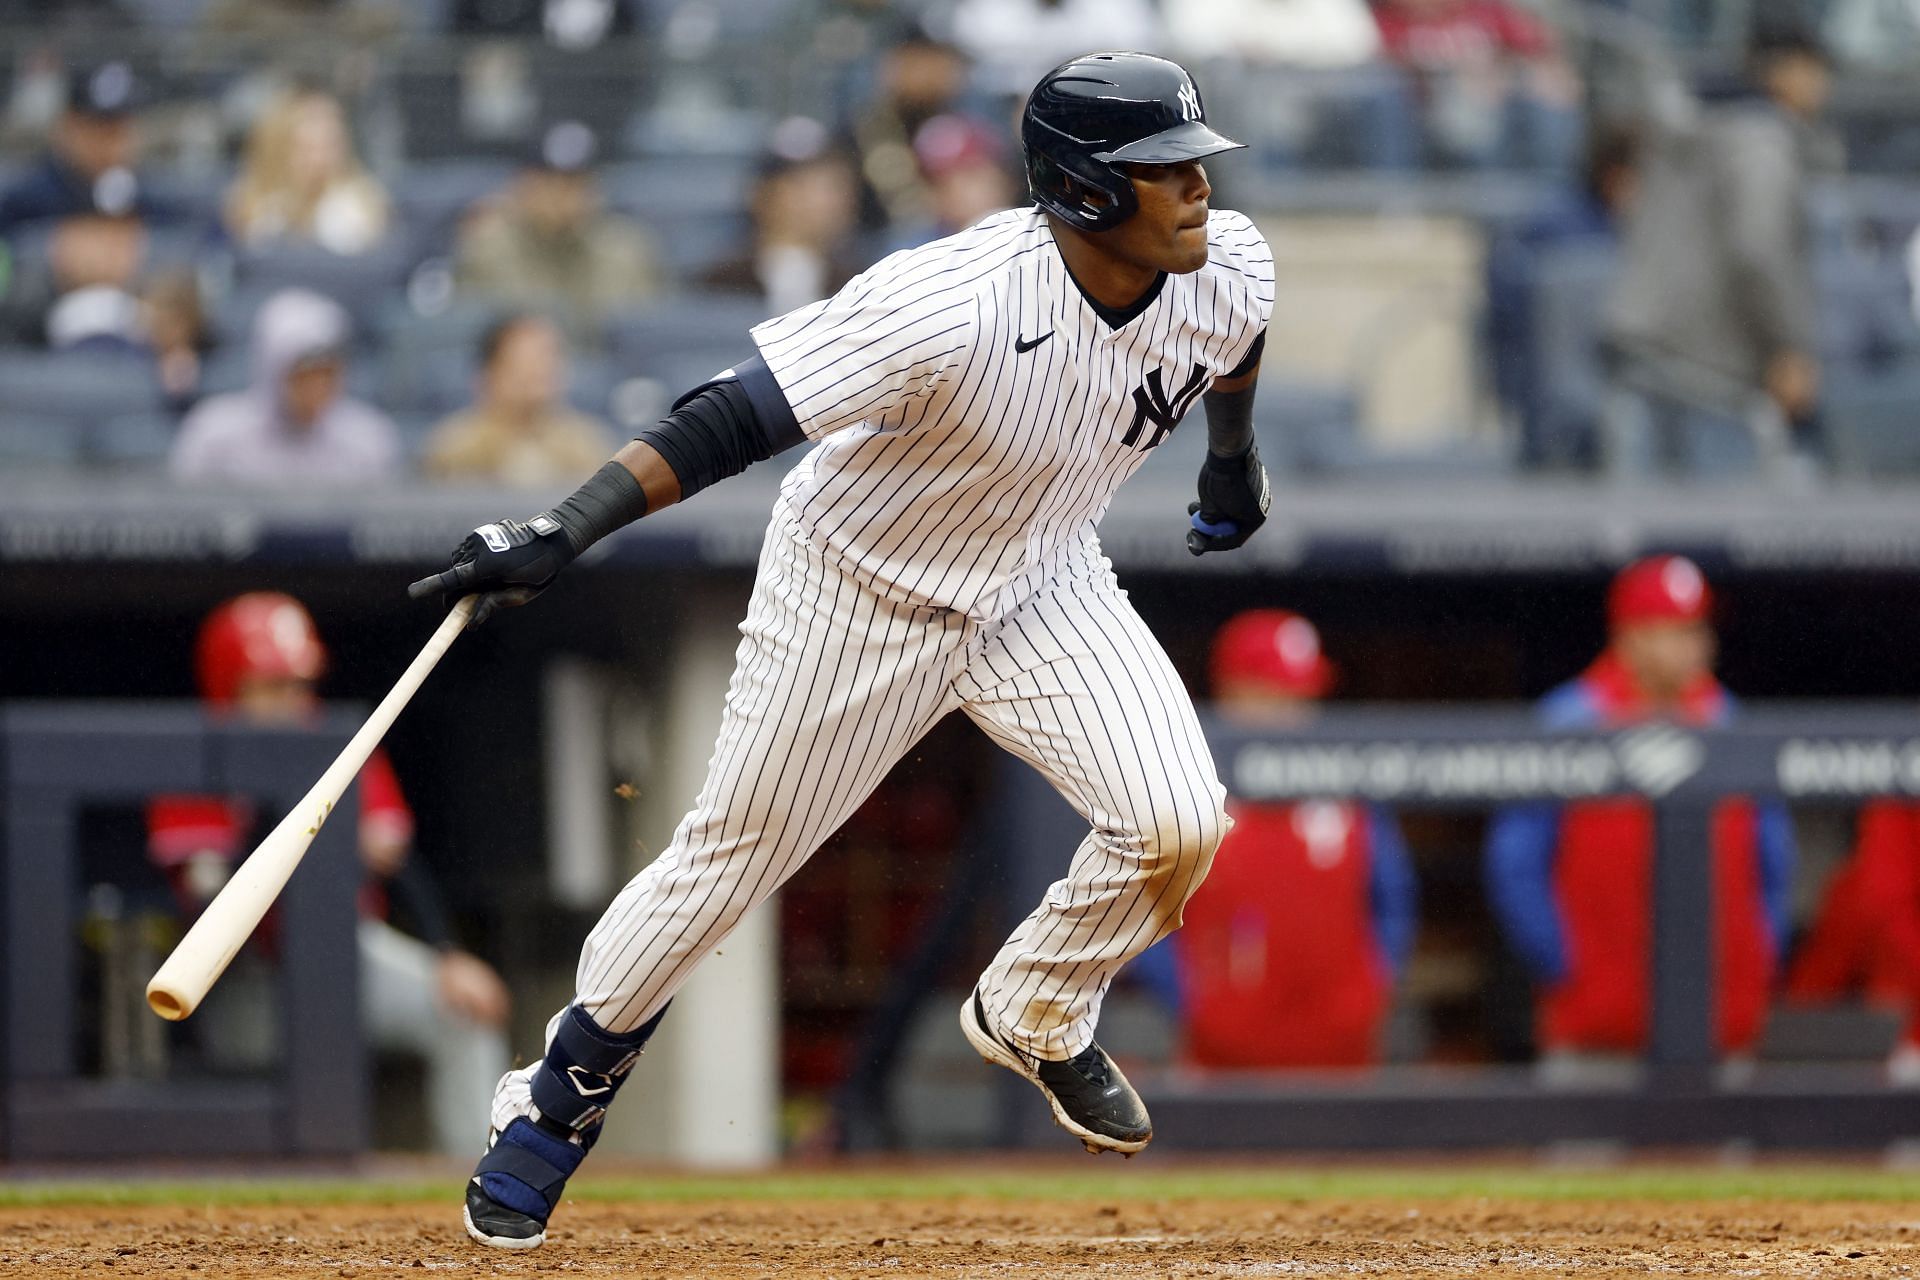 Franchy Cordero has been forced into action for the New York Yankees